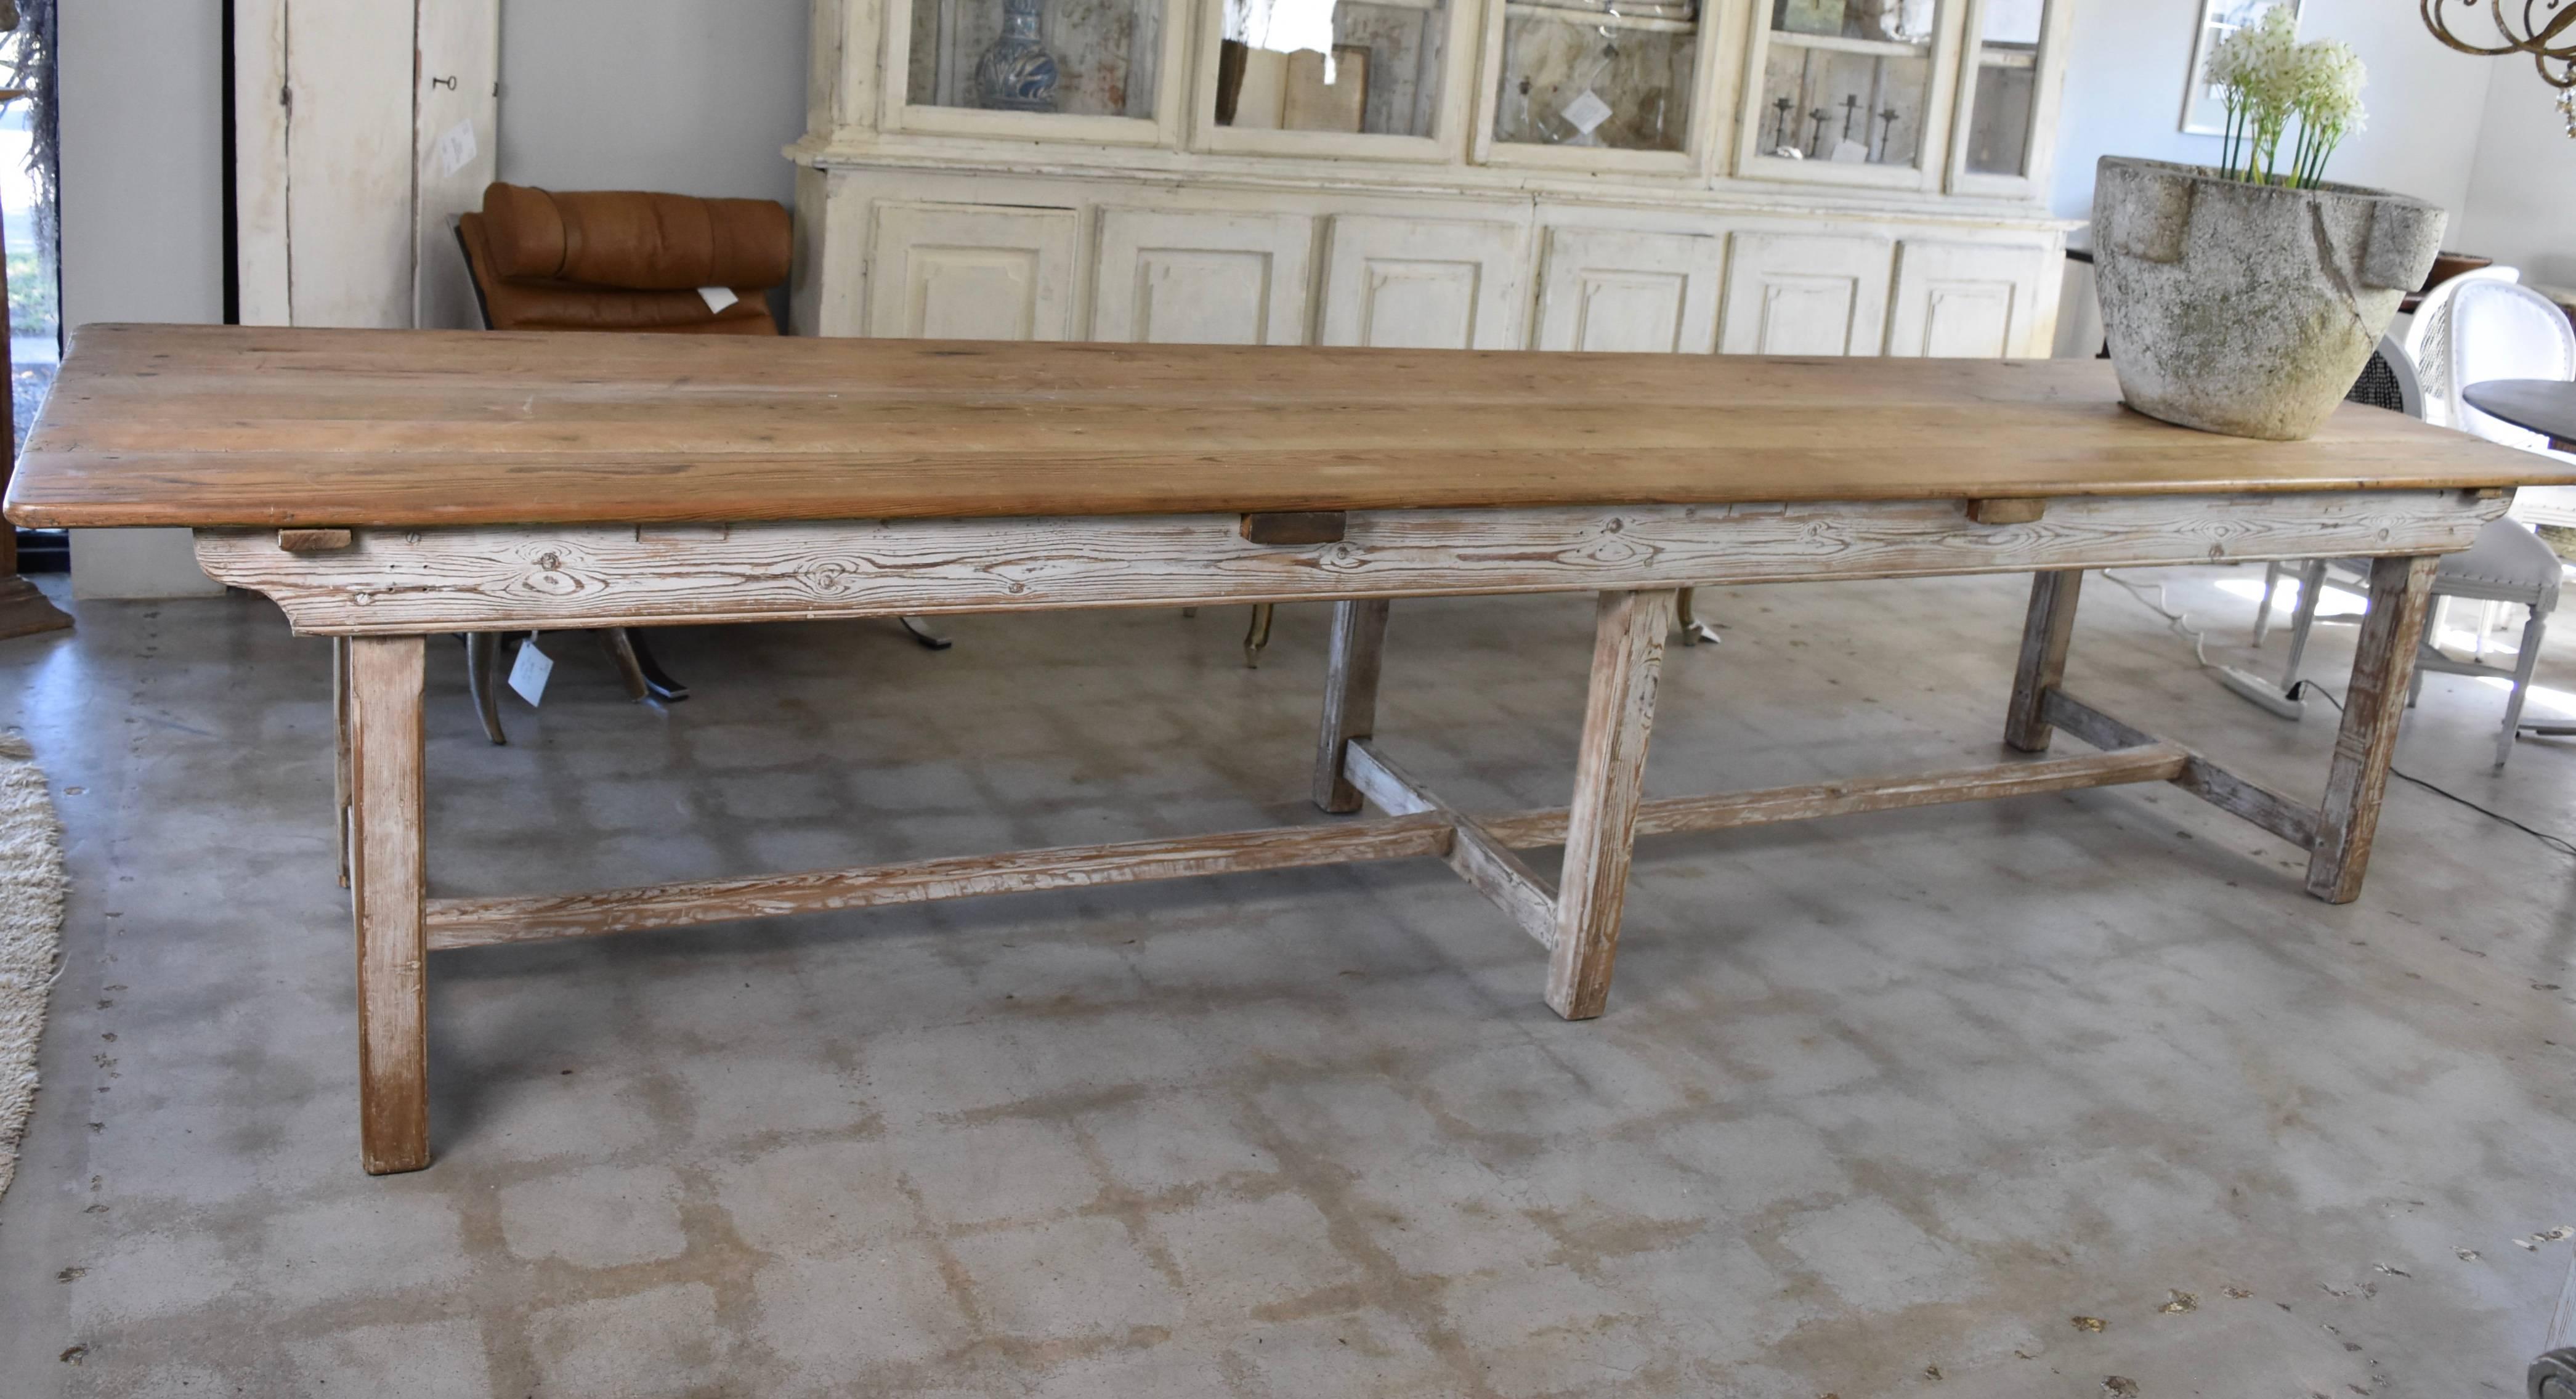 This is French, late 19th century to early 20th century farm table that's pegged, Pine with a painted or washed white base. It easily seats 10 people with large chairs or up to 14 with smaller chairs. It's very sturdy and no problem for guest to